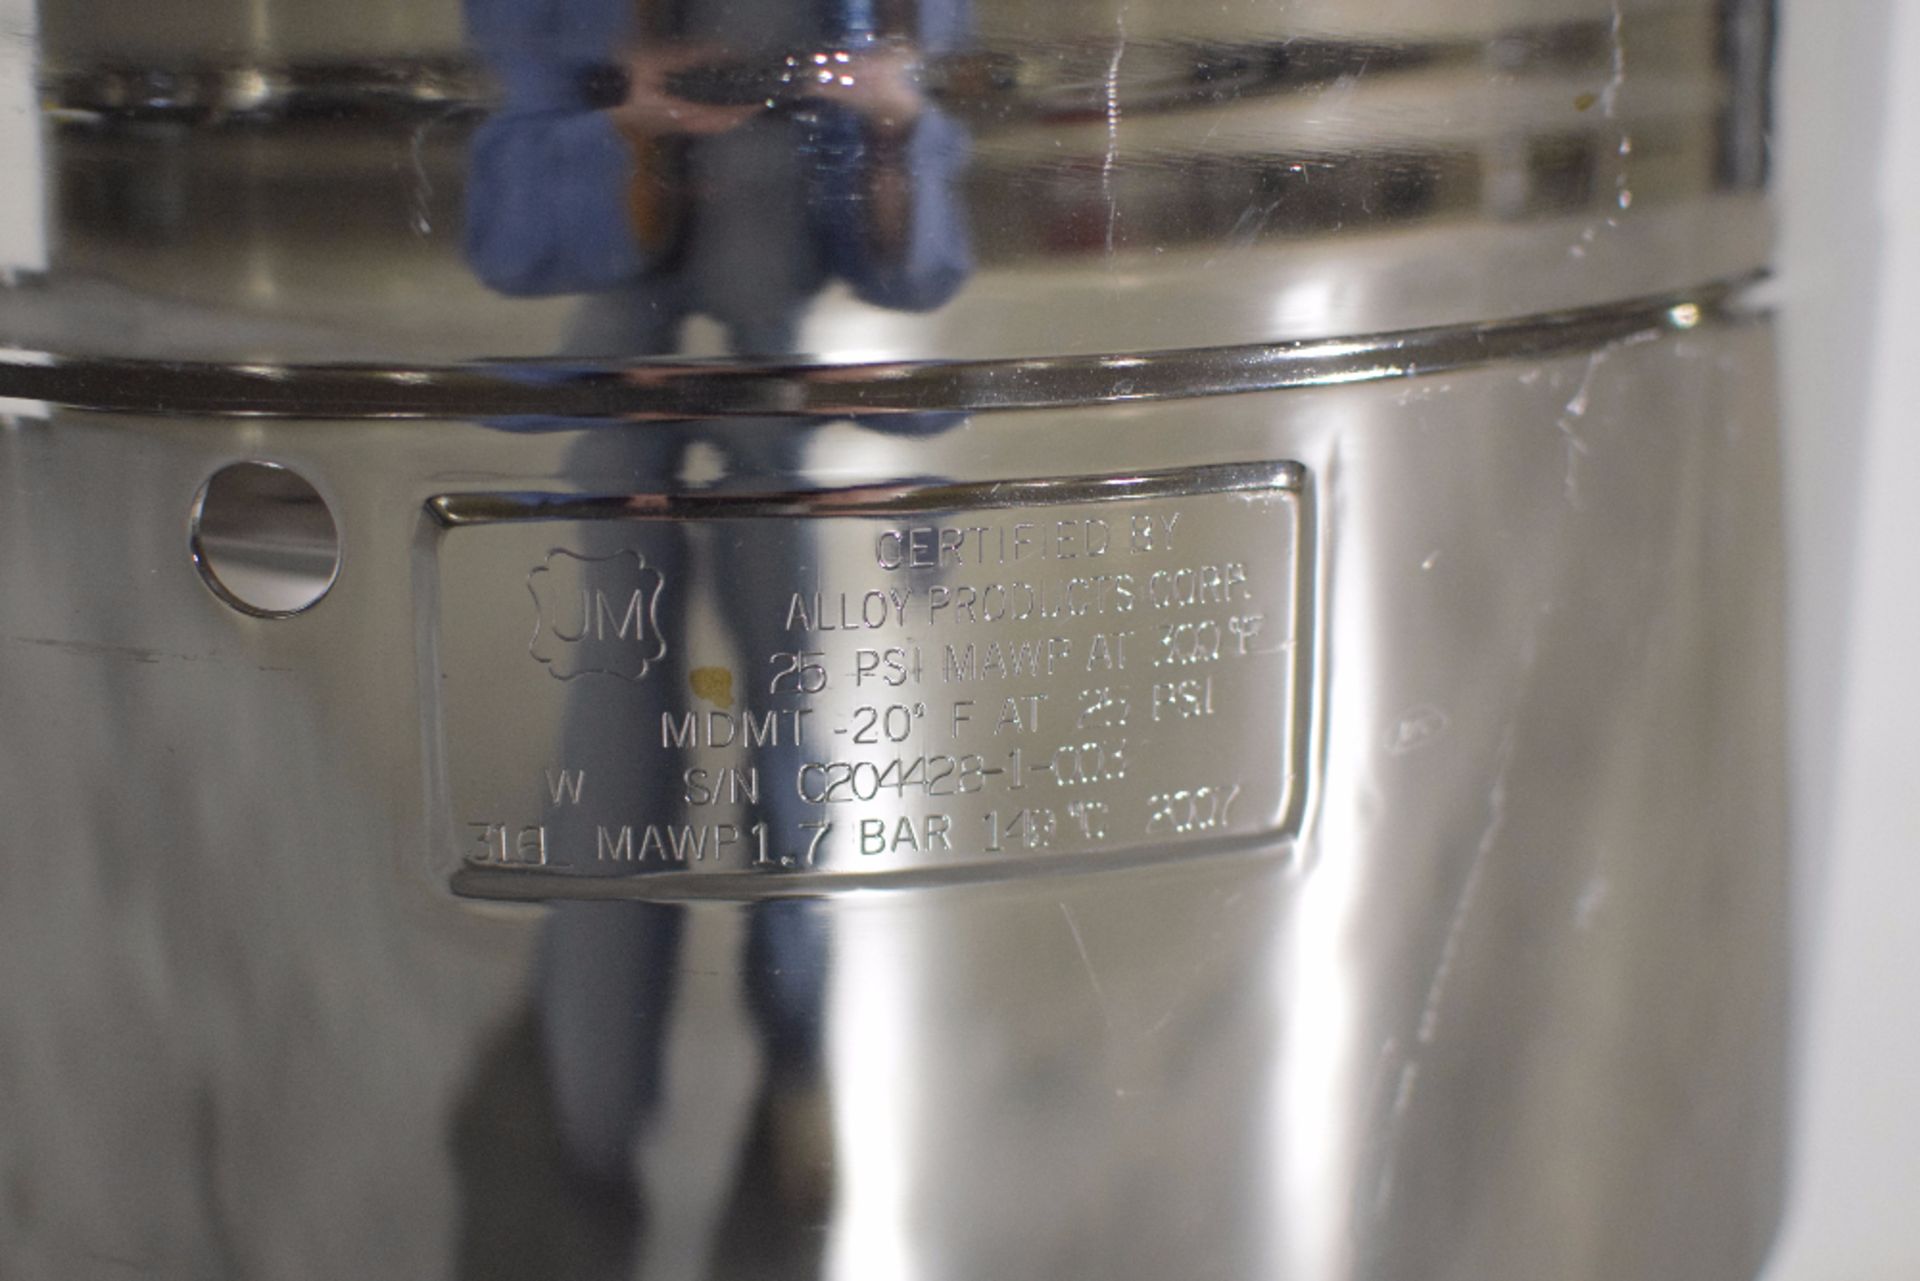 Alloy Products Stainless Steel Vessel - Image 2 of 2